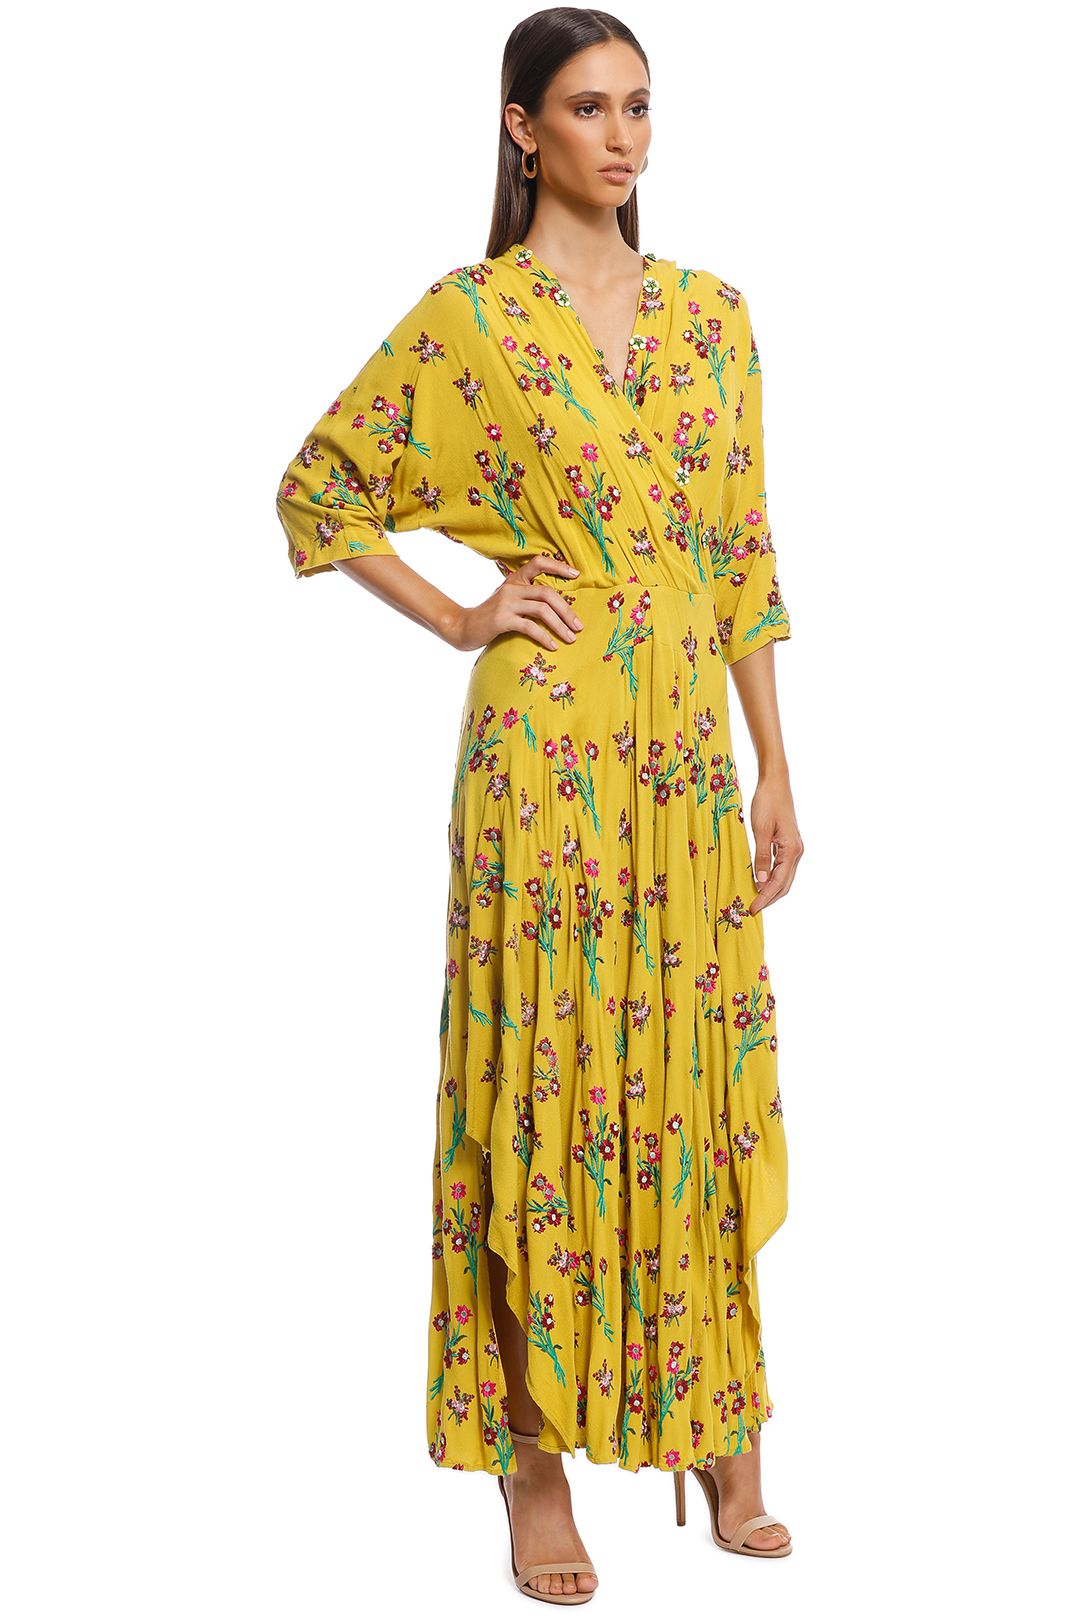 Trelise Cooper - Eat Drink Be Maxi Dress - Yellow - Side